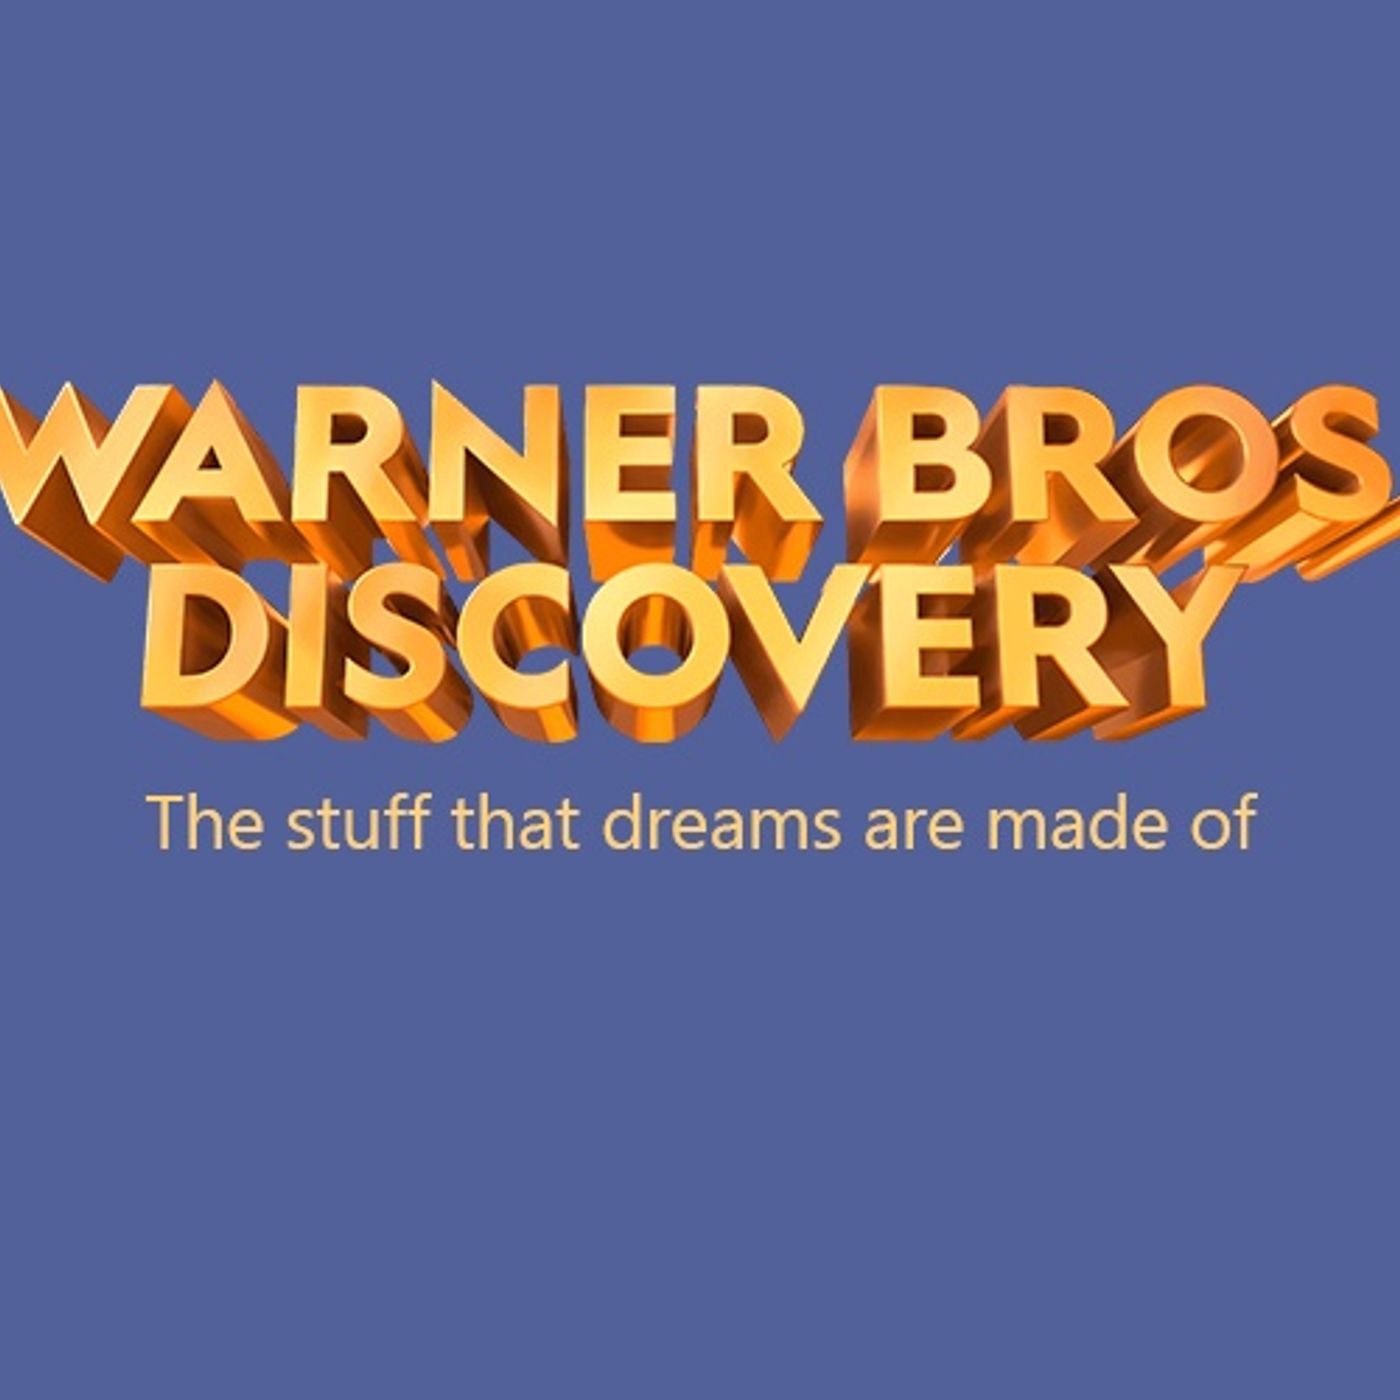 Warner Bros. Discovery Merger: What’s happening and what do we know so far?